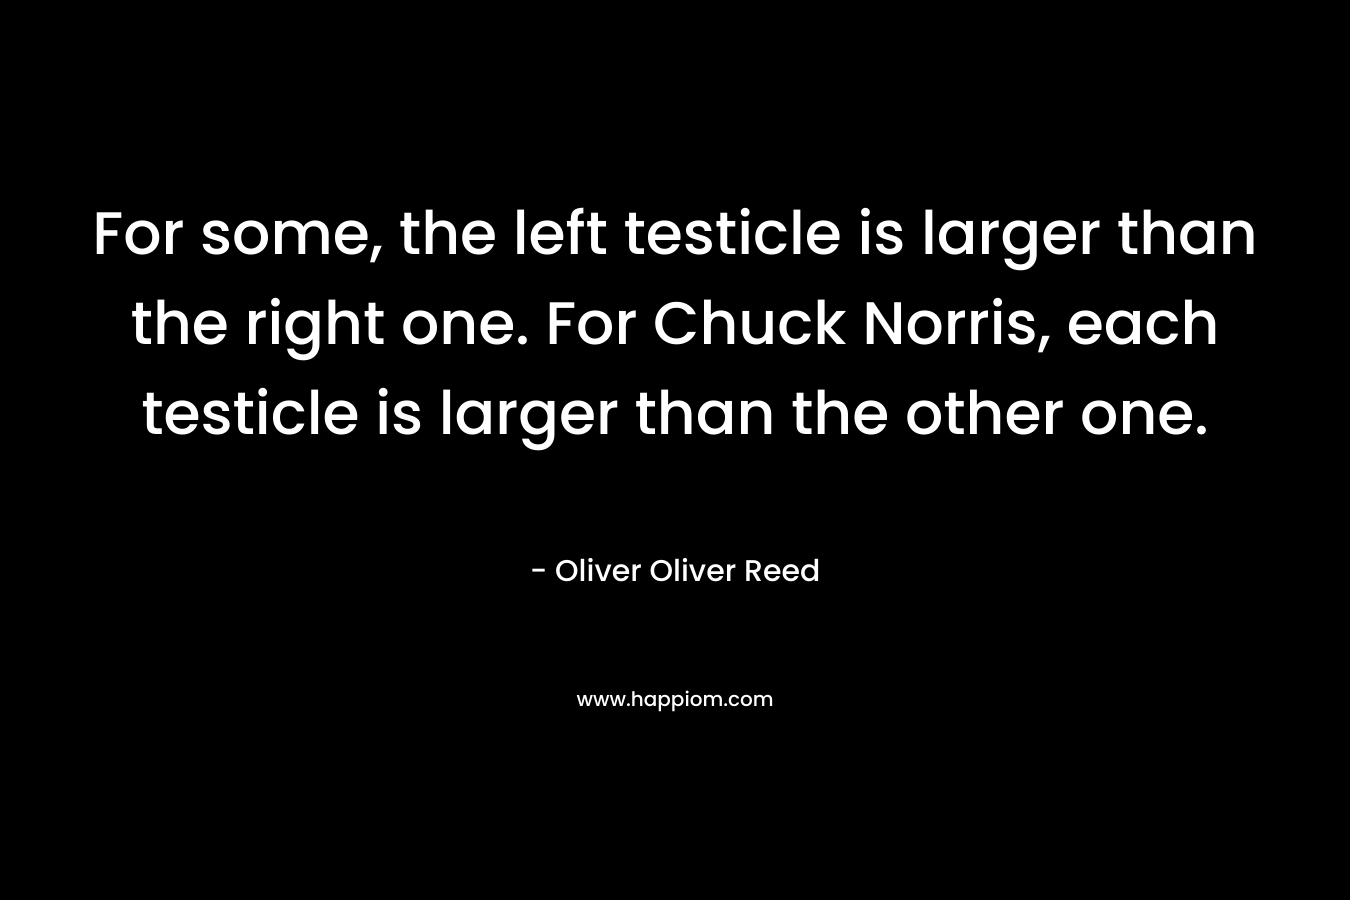 For some, the left testicle is larger than the right one. For Chuck Norris, each testicle is larger than the other one. – Oliver Oliver Reed